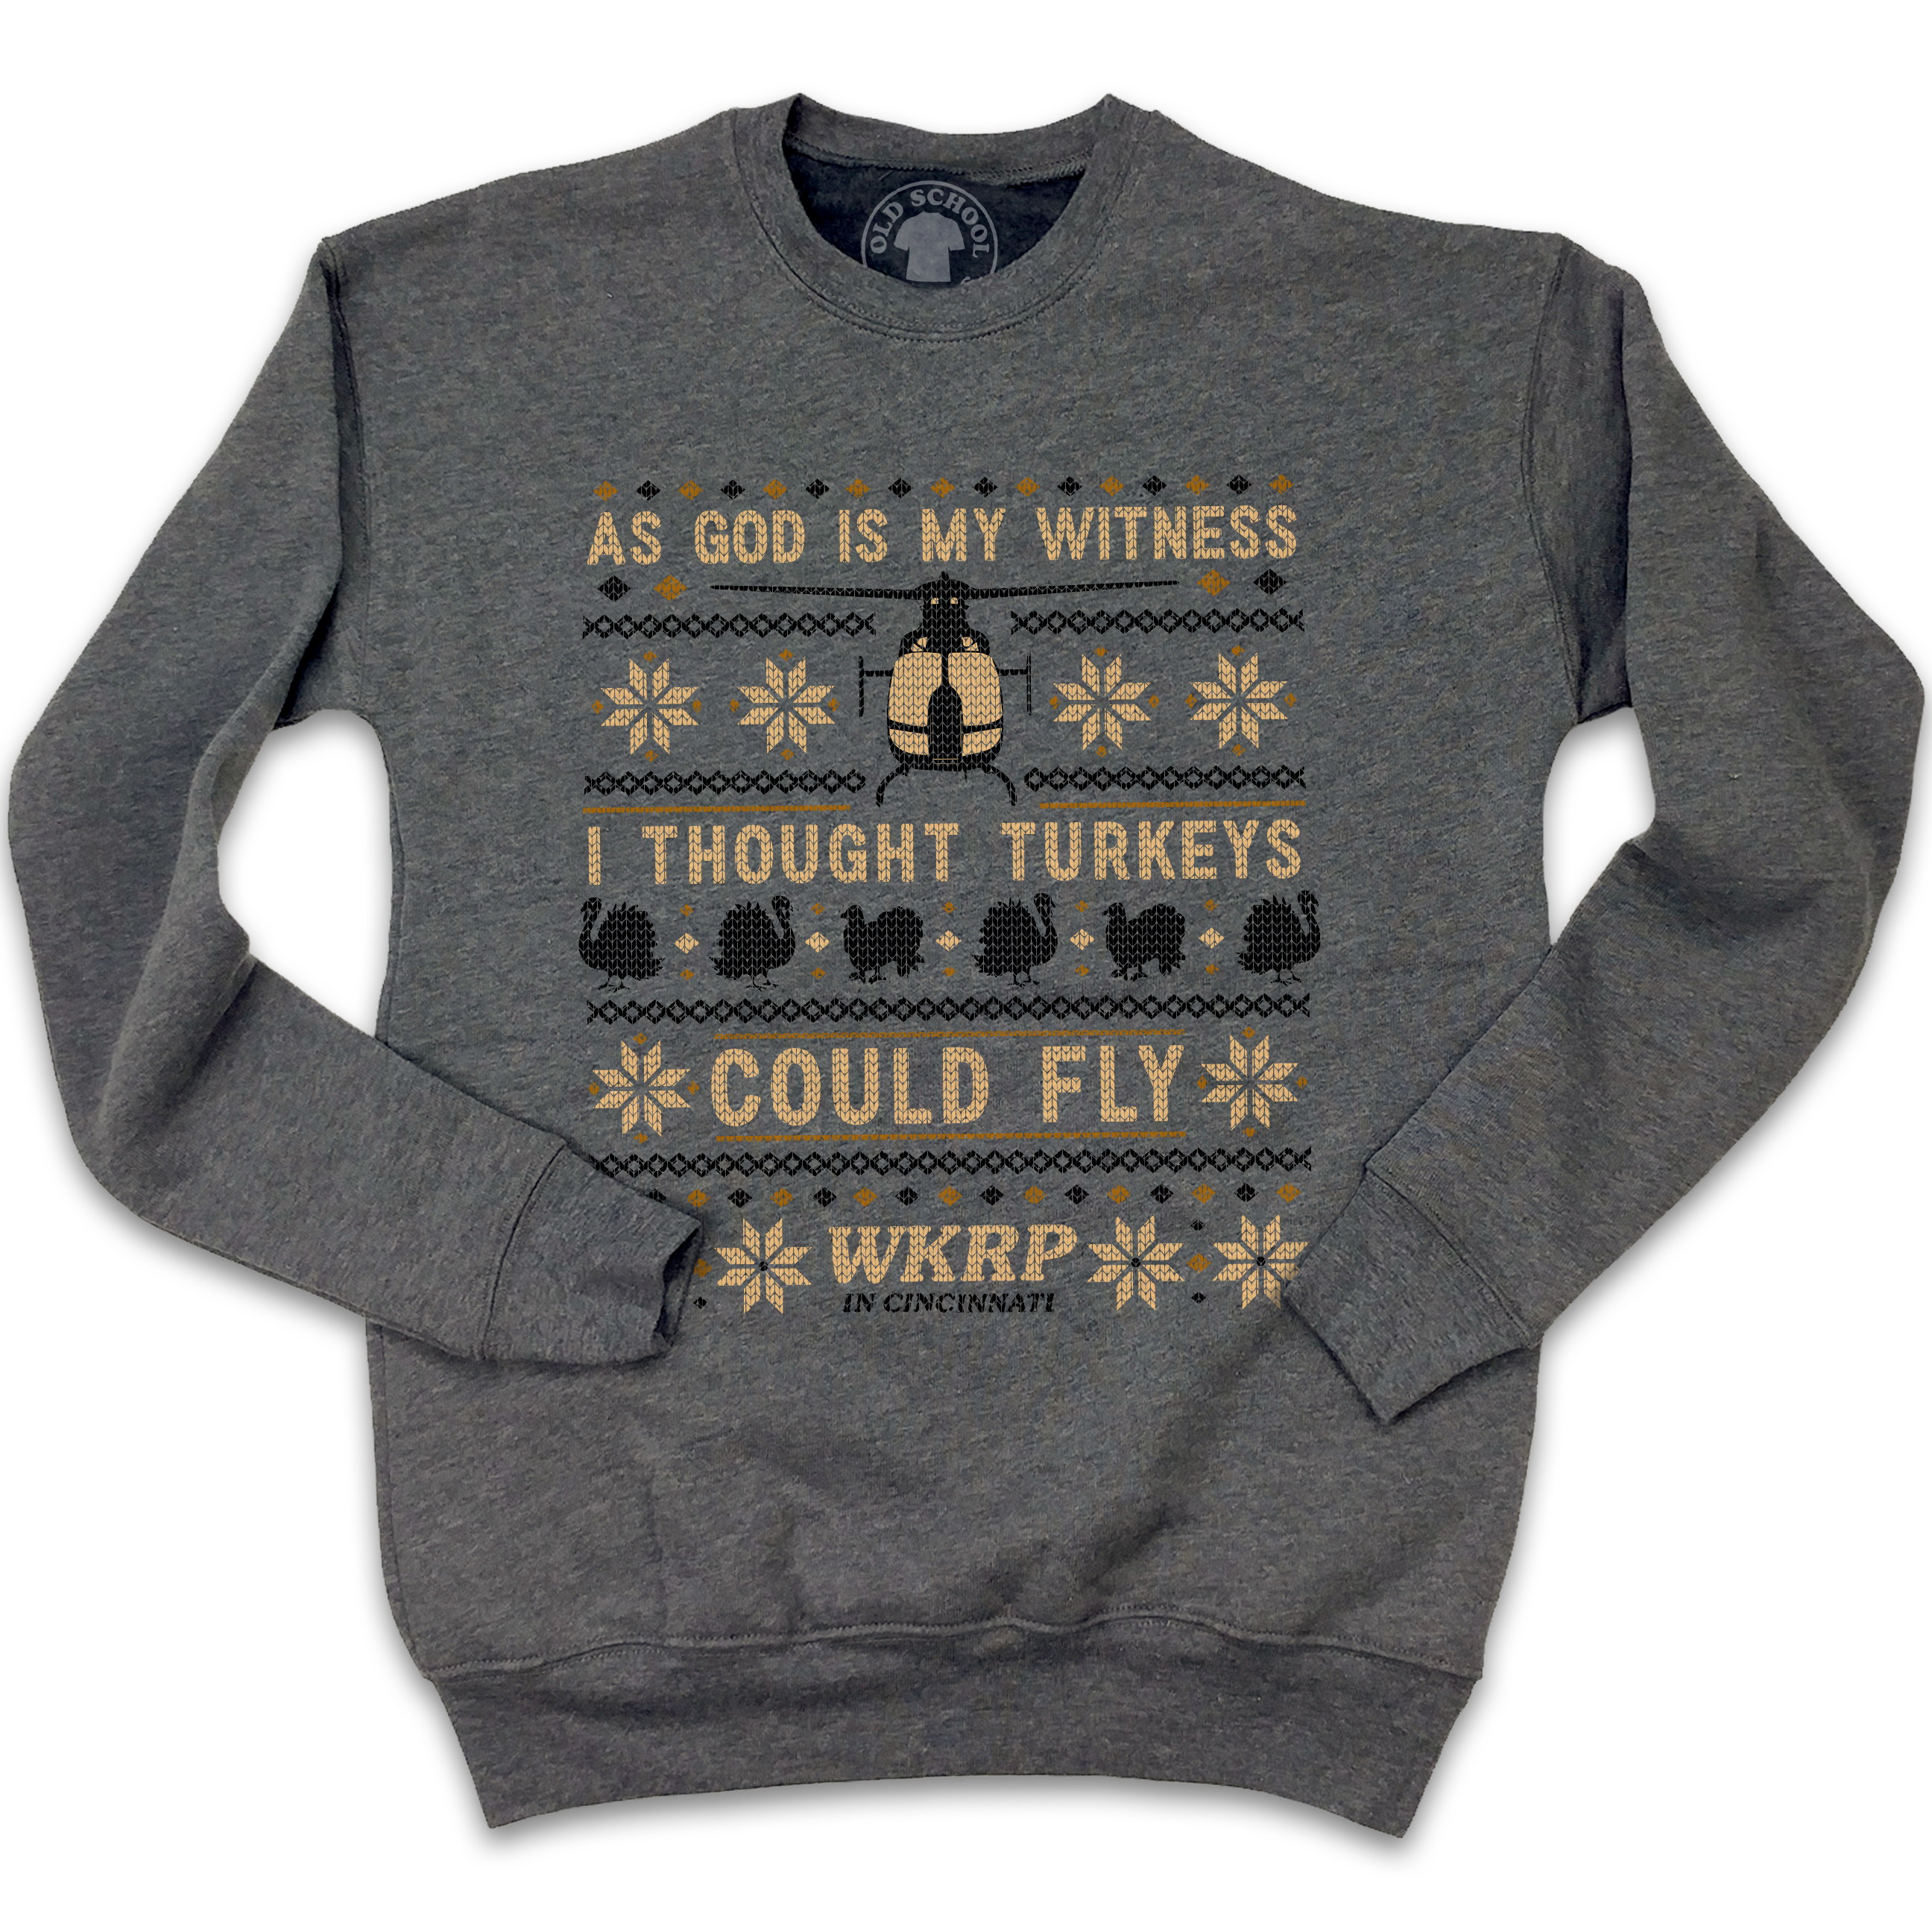 I Thought Turkeys Could Fly - WKRP Ugly Sweatshirt